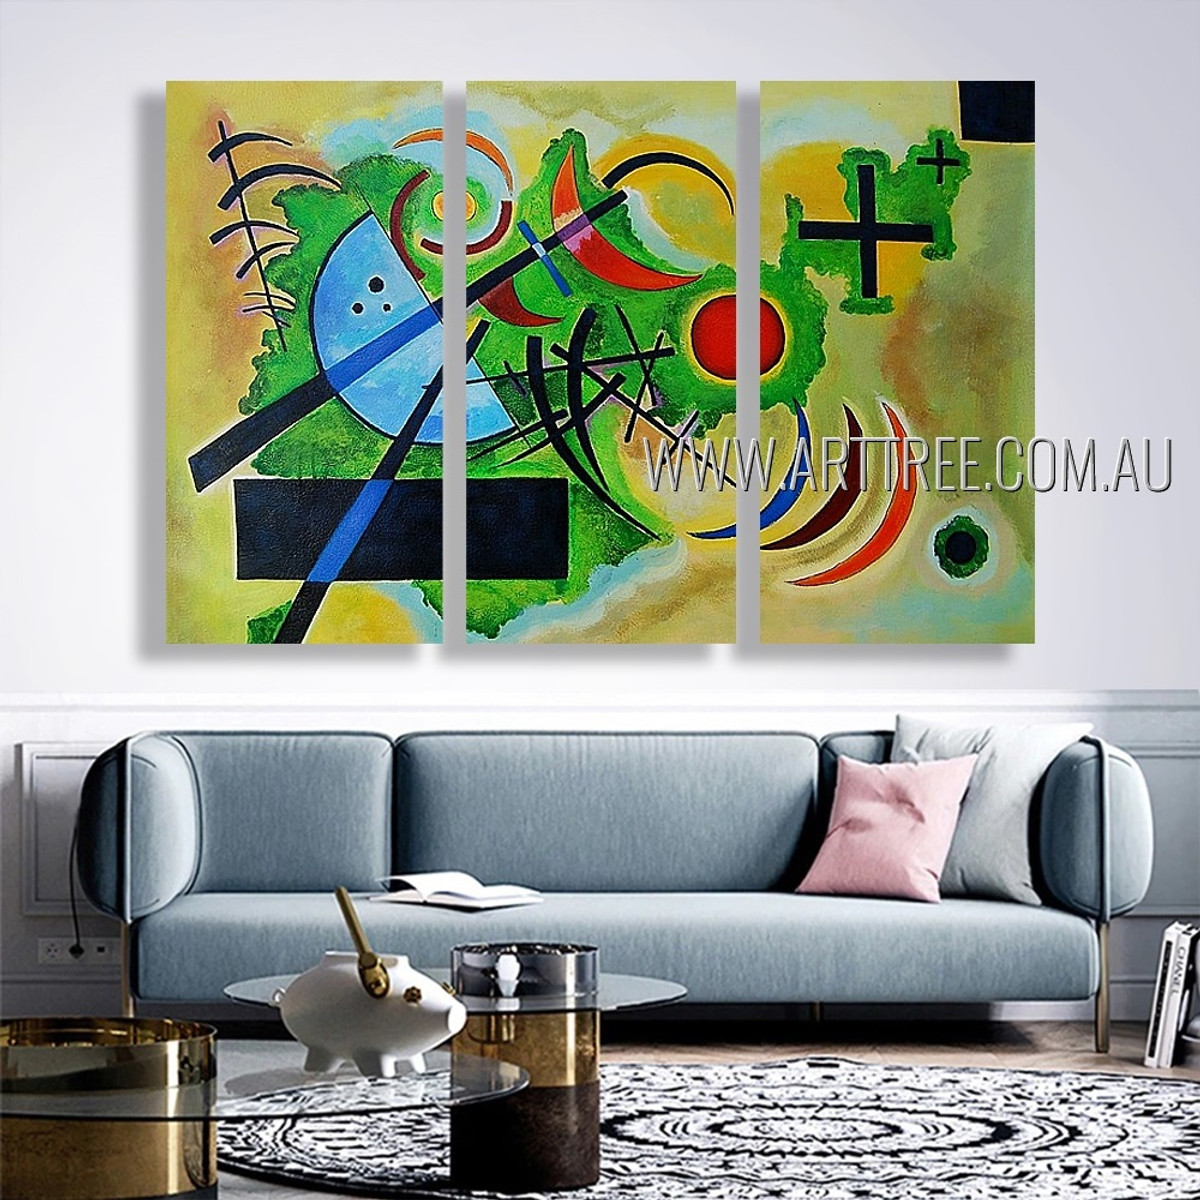 Solid Green Abstract Reproduction Artist Handmade 3 piece Modern Artwork For Room Tracery